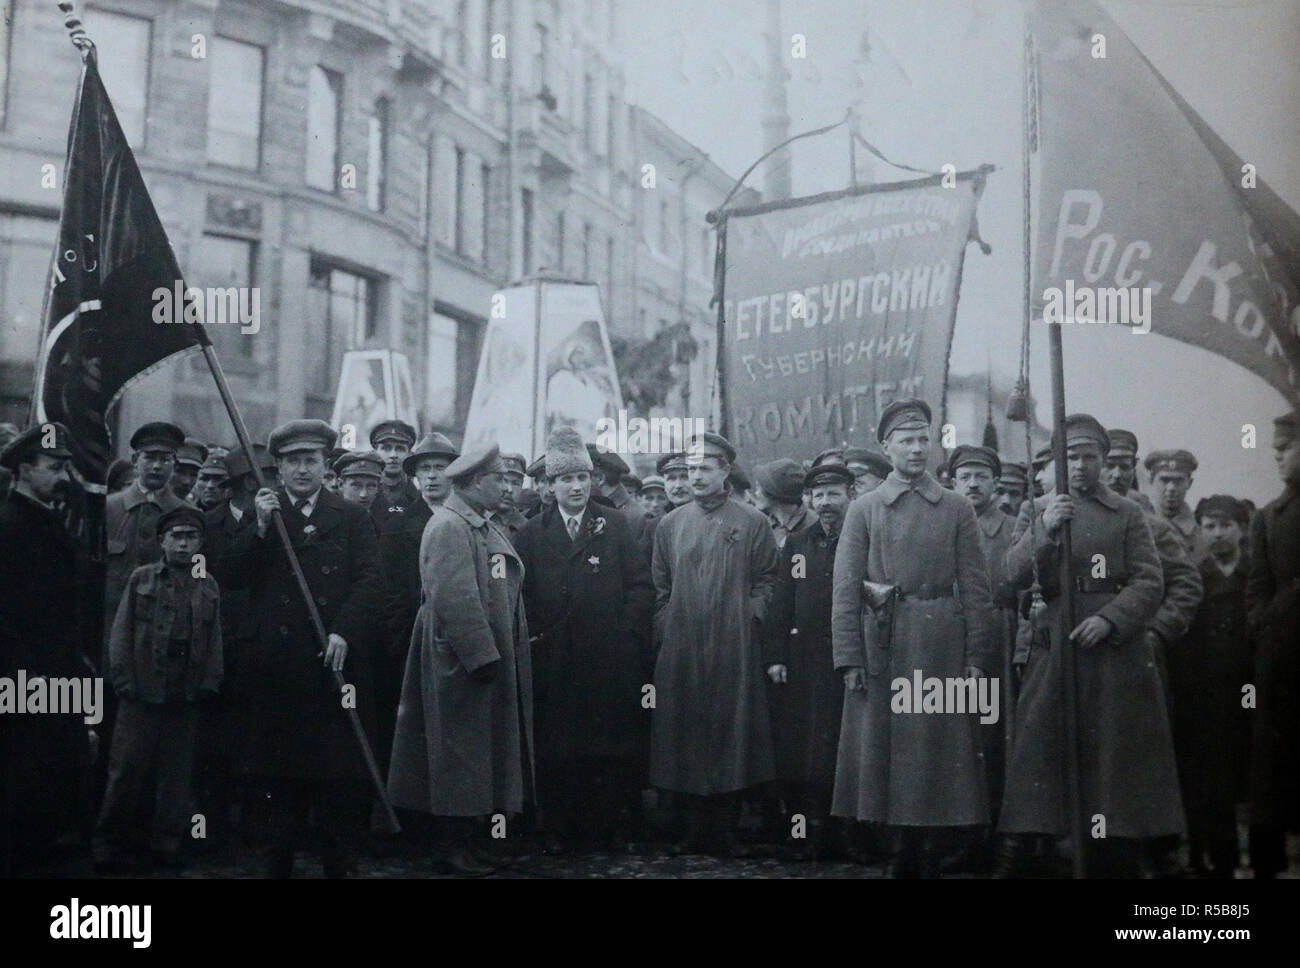 The document shows several Bolshevik leaders in front of a procession for the 1st of May, 1920. In the center, one recognizes Grigori Zinoviev with an Astrakhan. The central banner reads: 'Committee of the Petrograd Province'.  Third on the right from Zinoviev, the man may be Nikolaï Bukharine (1888-1938), member of the Politburo and the Central Committee of the Communist Party, to whom Lenin referred as 'the favorite son of the Party'. Stock Photo